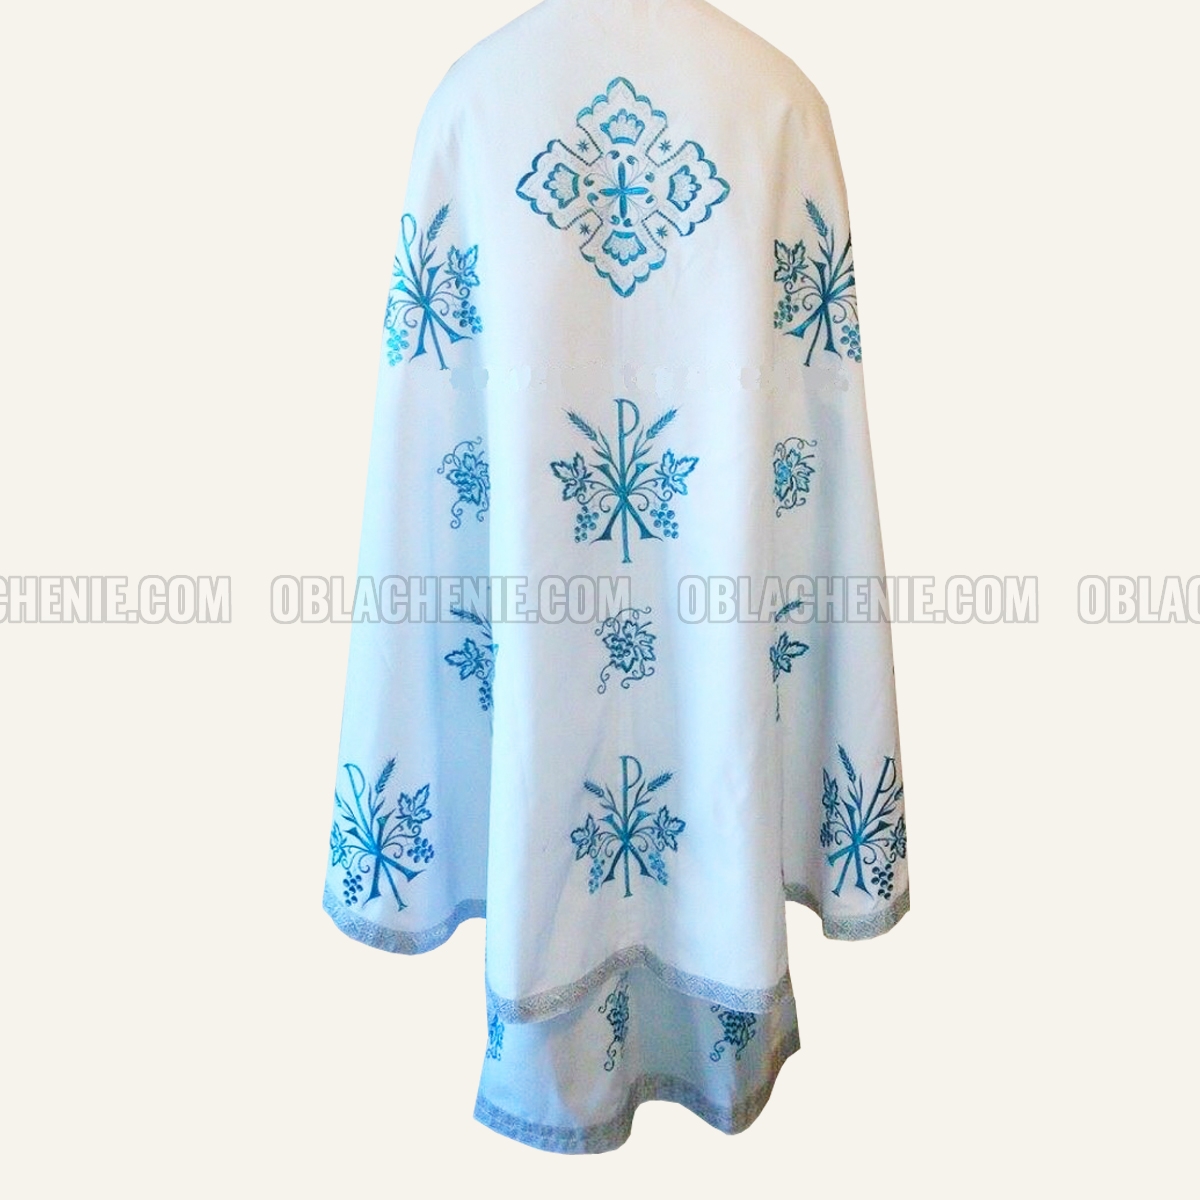 Embroidered priest's vestments 10259